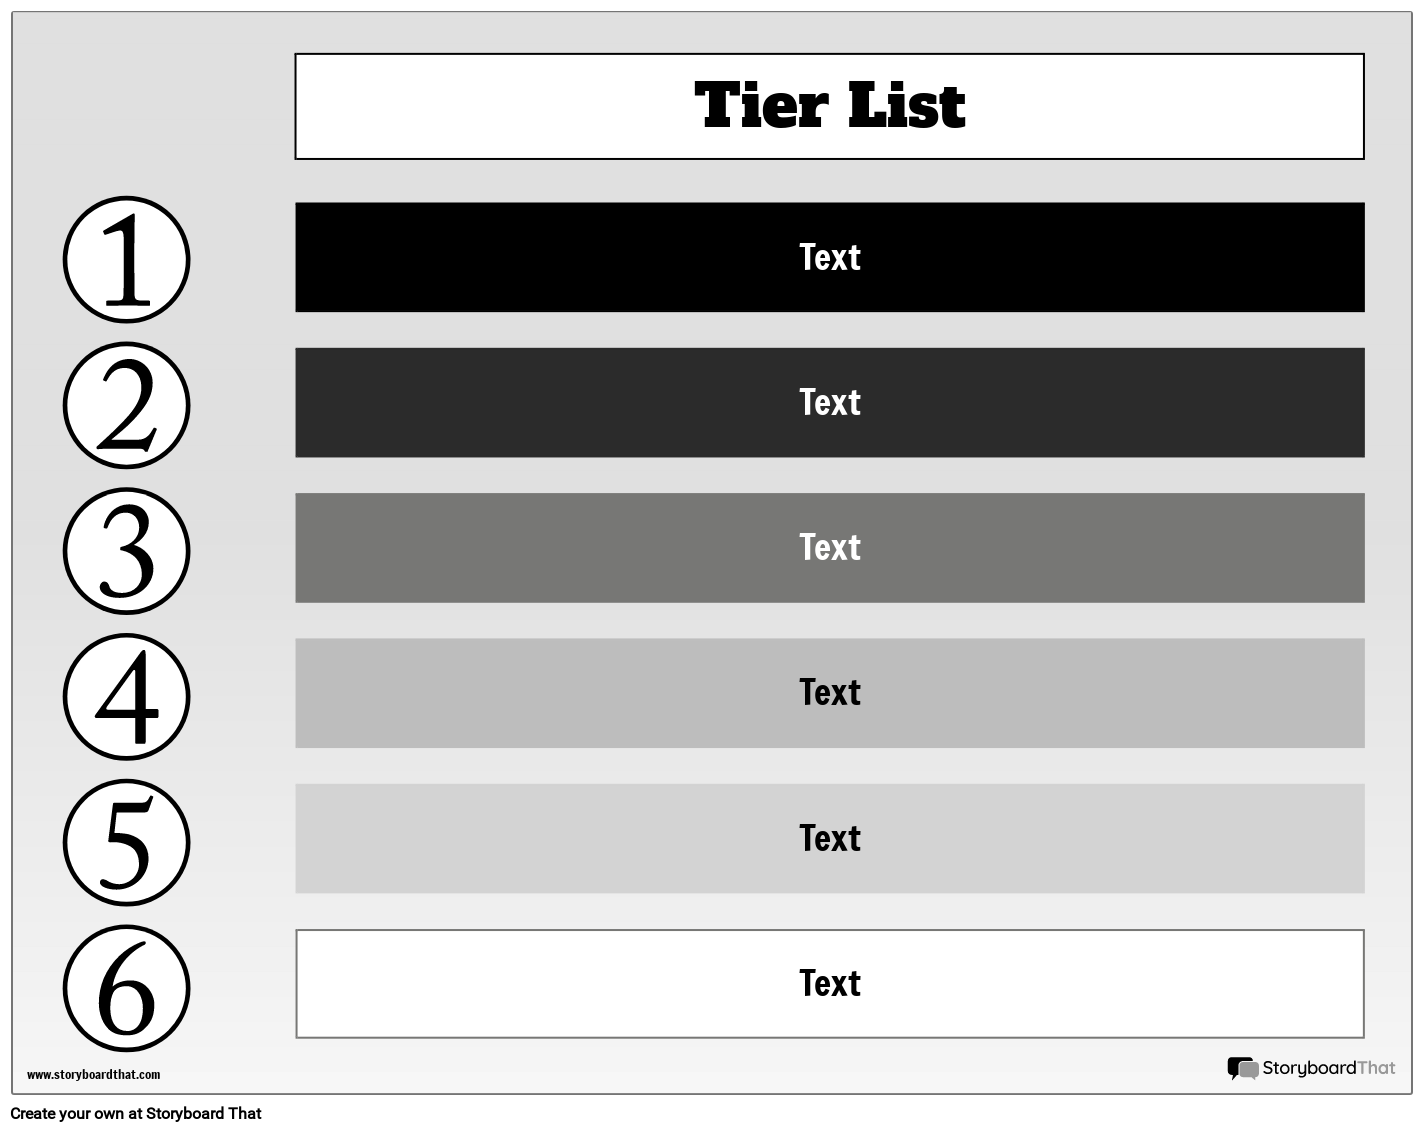 Generate Your own Tie List - Online Designer for Free